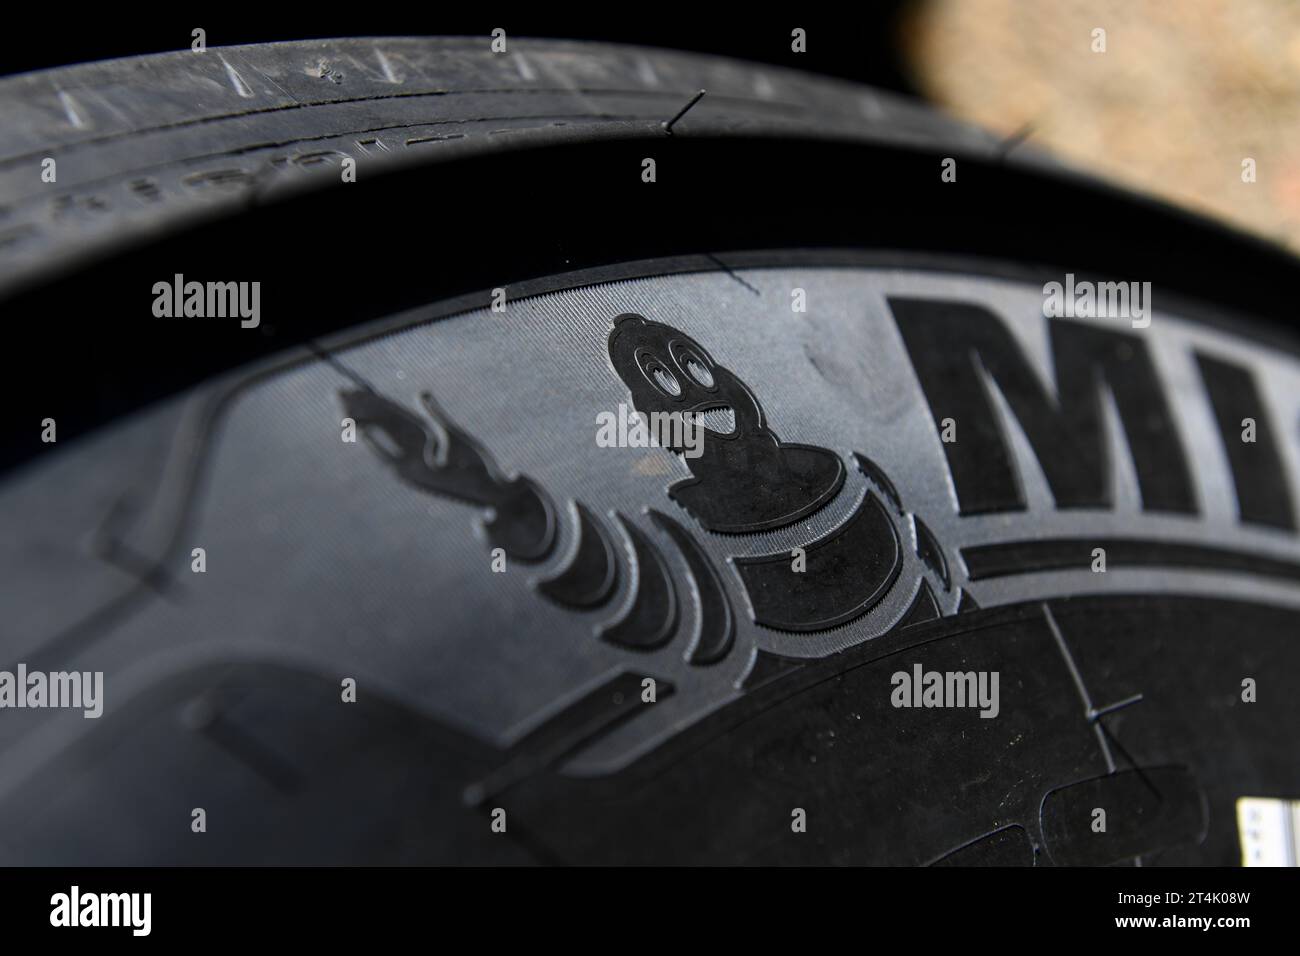 A close-up of a truck tyre showing the mascot and logo of Michelin man in relief form on the tyre sidewall. Stock Photo